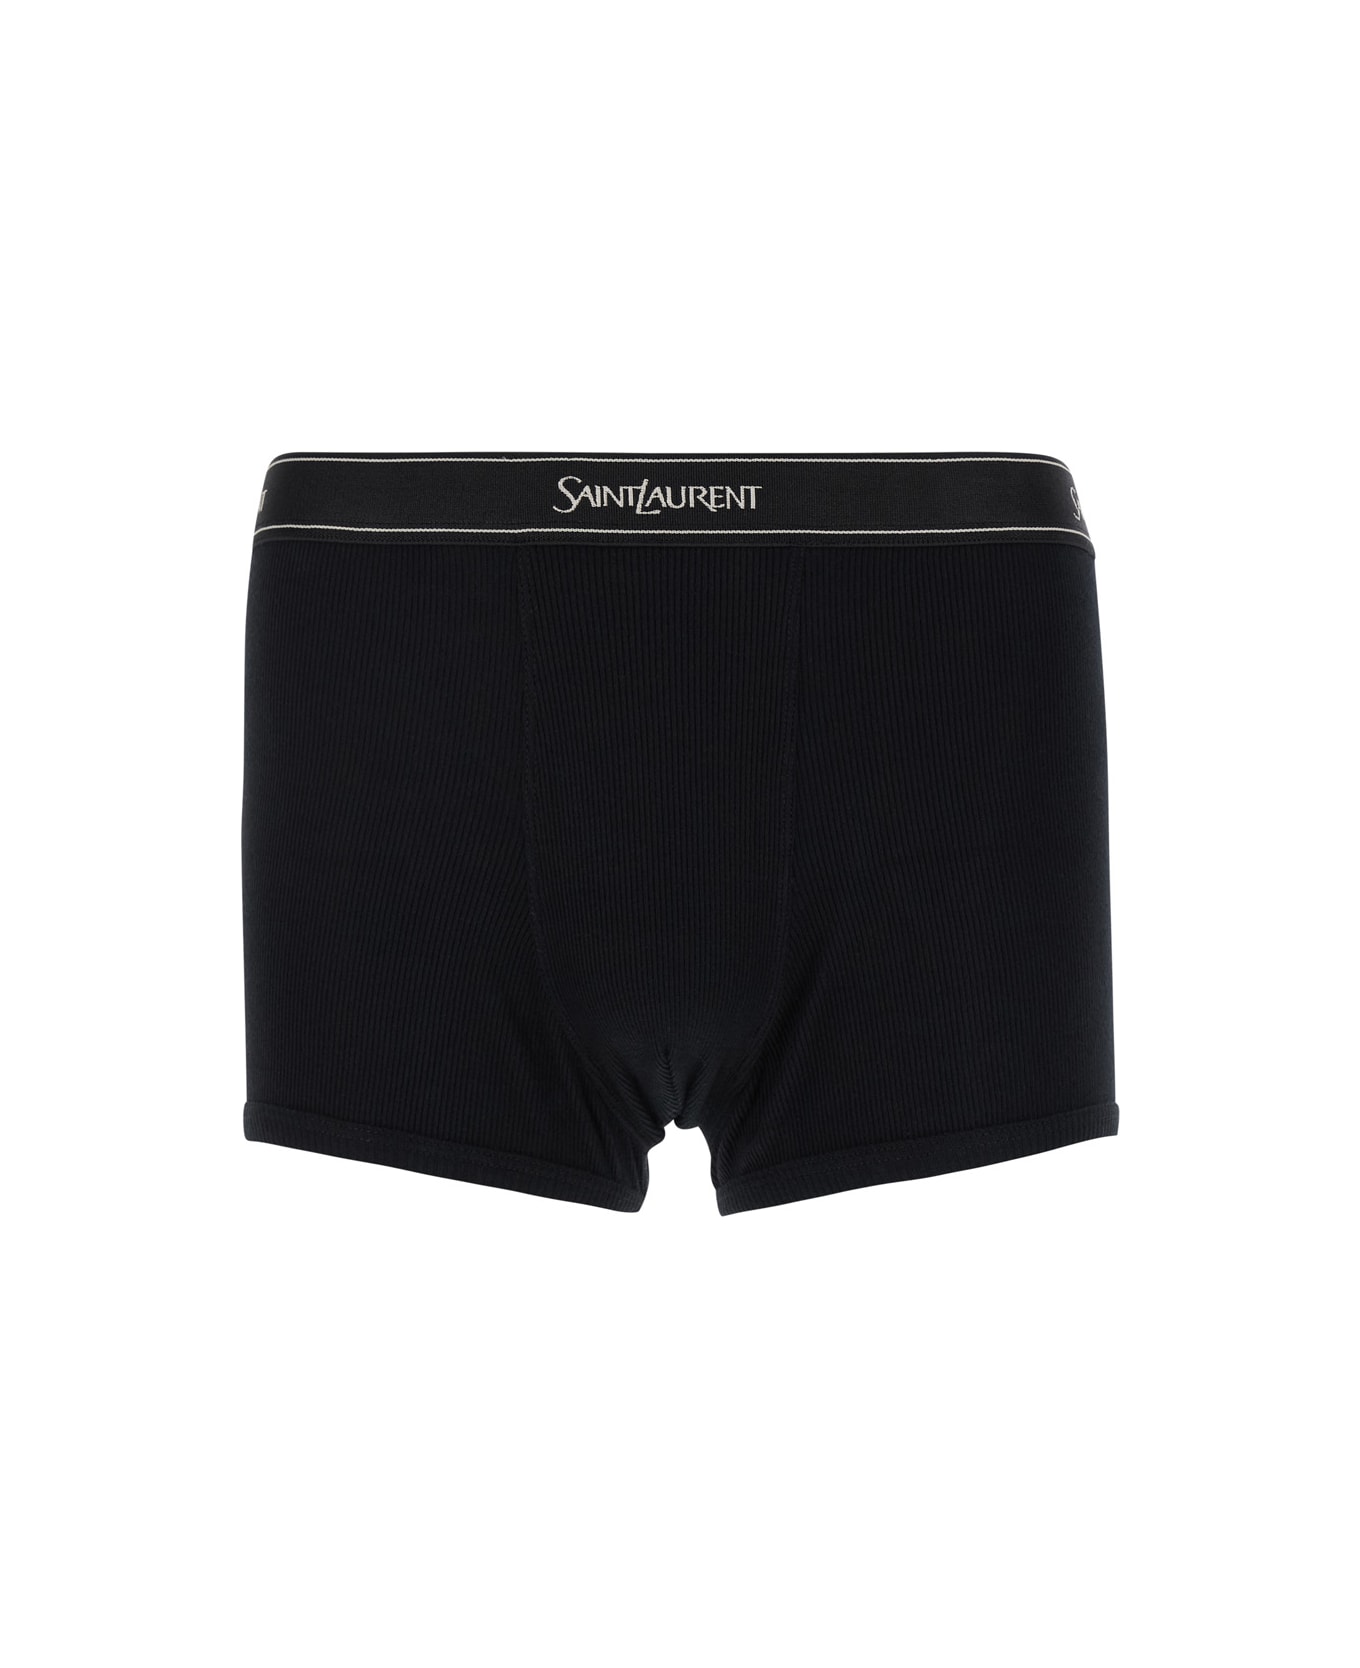 Saint Laurent Black Boxer Briefs With Logo Lettering Embroidery In Ribbed Cotton Man - NOIR